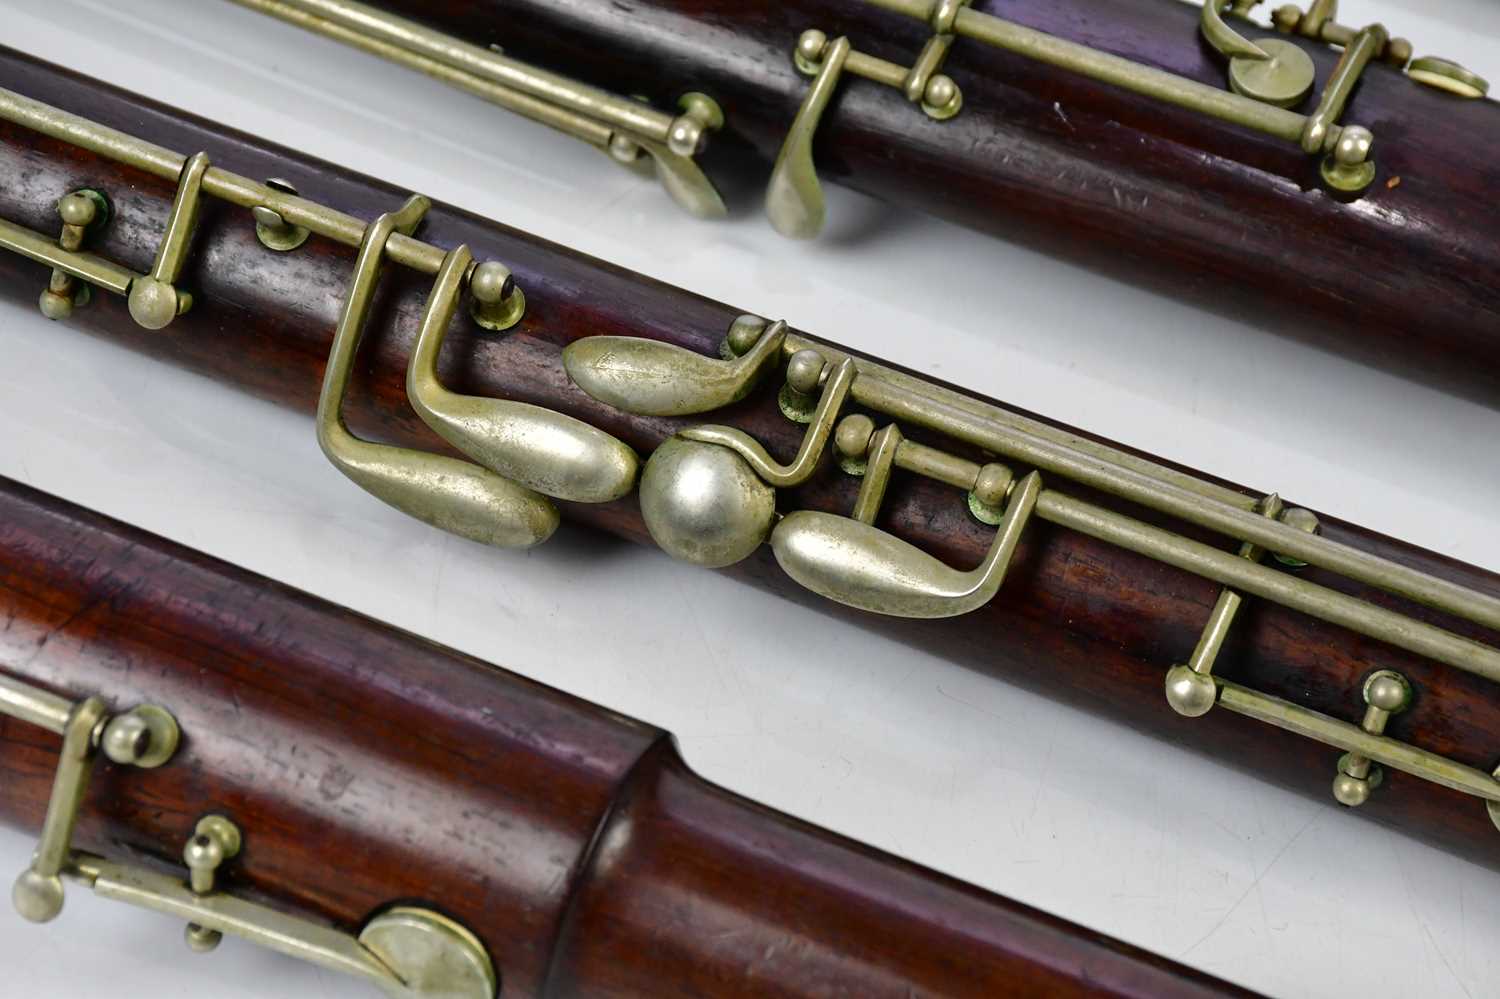 BUFFET CRAMPON, PARIS; a late 19th/early 20th century rosewood bassoon with nickel mounts, cased. - Image 4 of 4